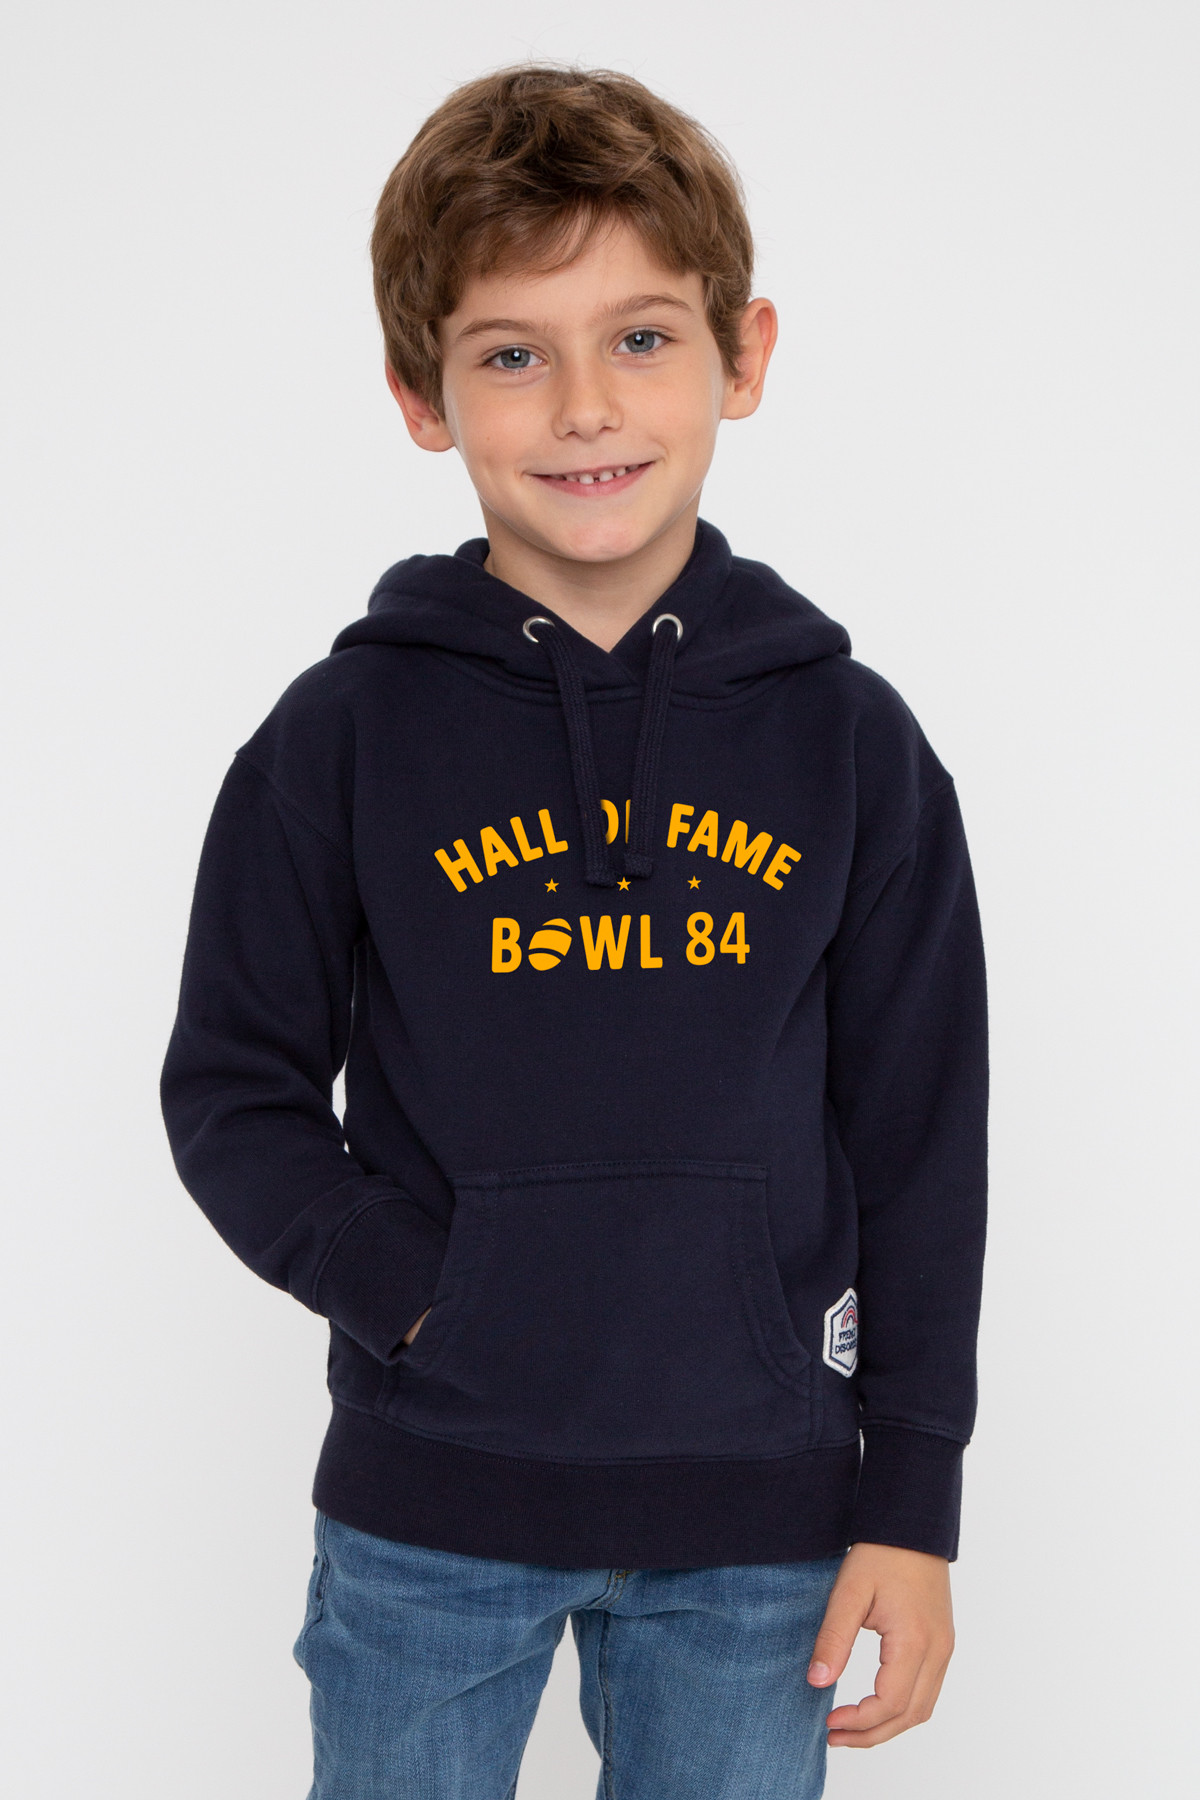 Photo de SWEATS À CAPUCHE Hoodie Kids HALL OF FAME chez French Disorder